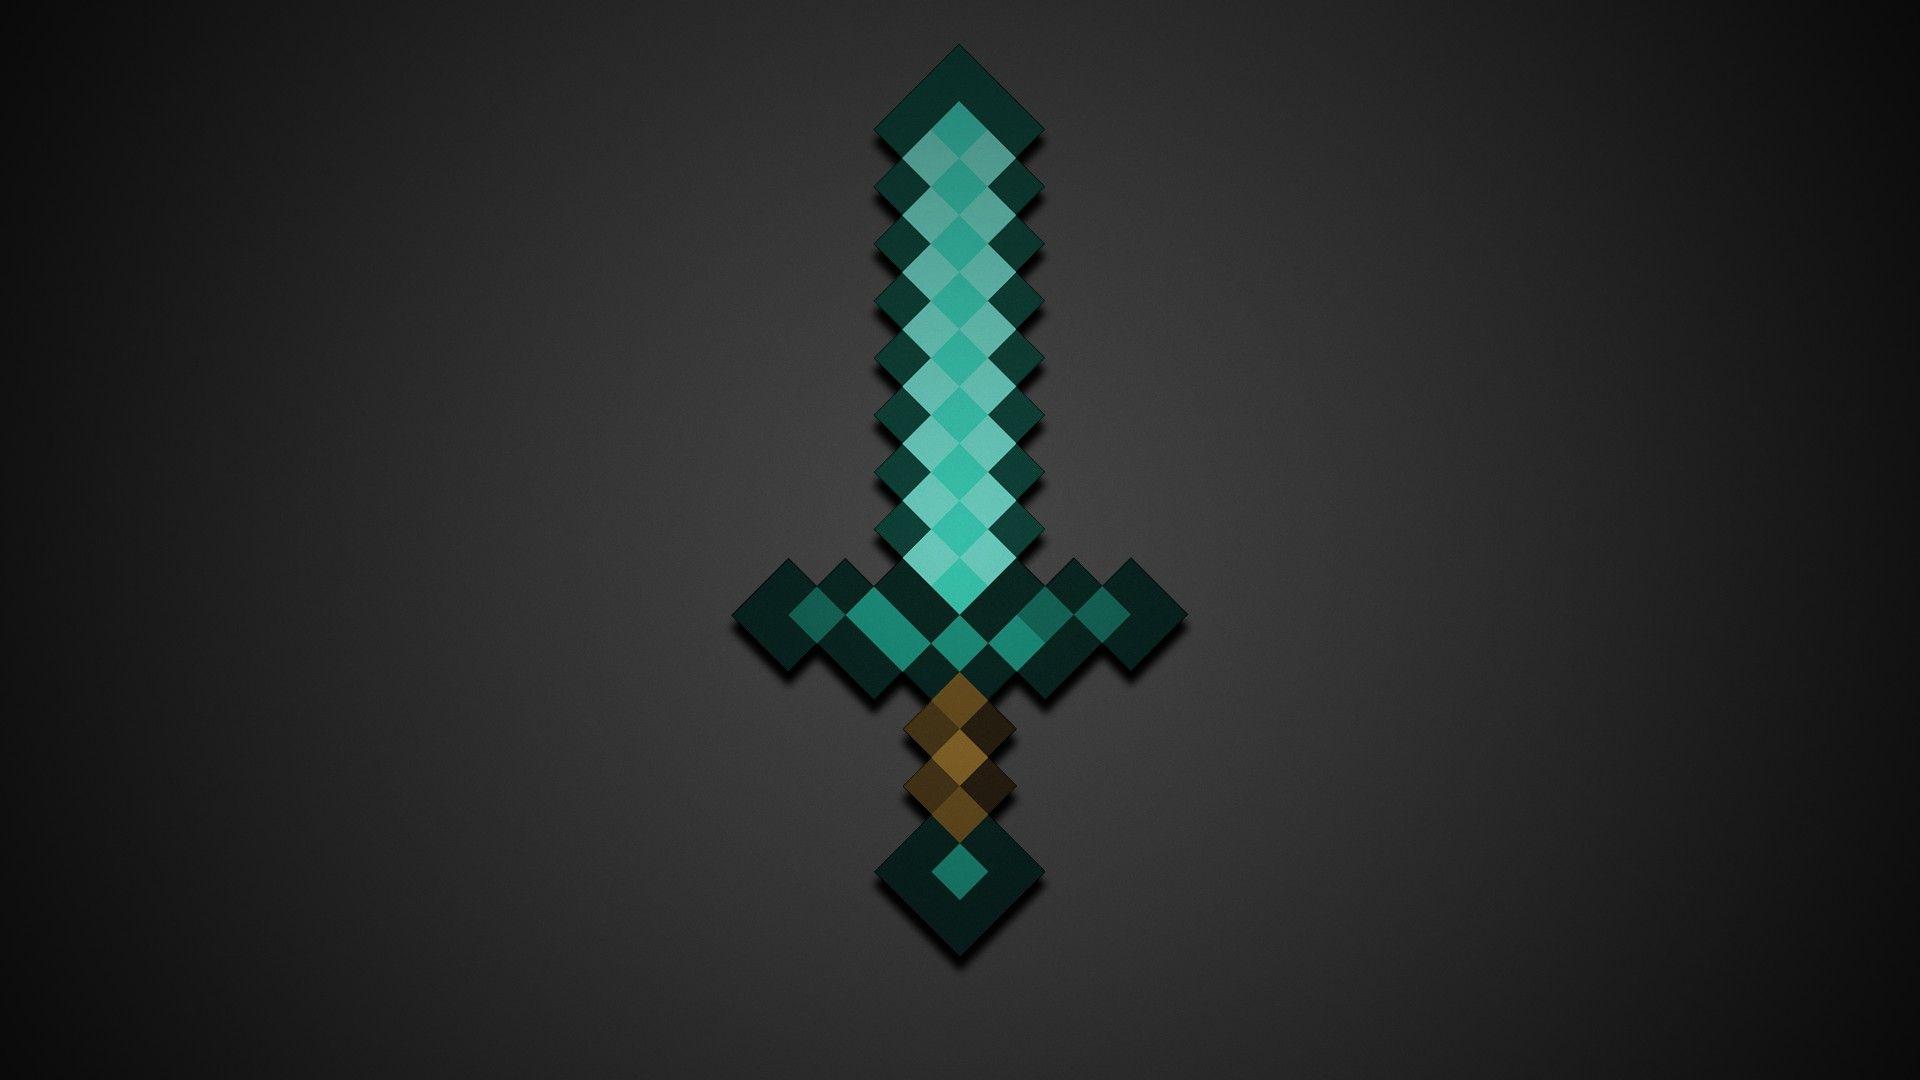 Wallpapers For – Minecraft Diamond Wallpapers Hd